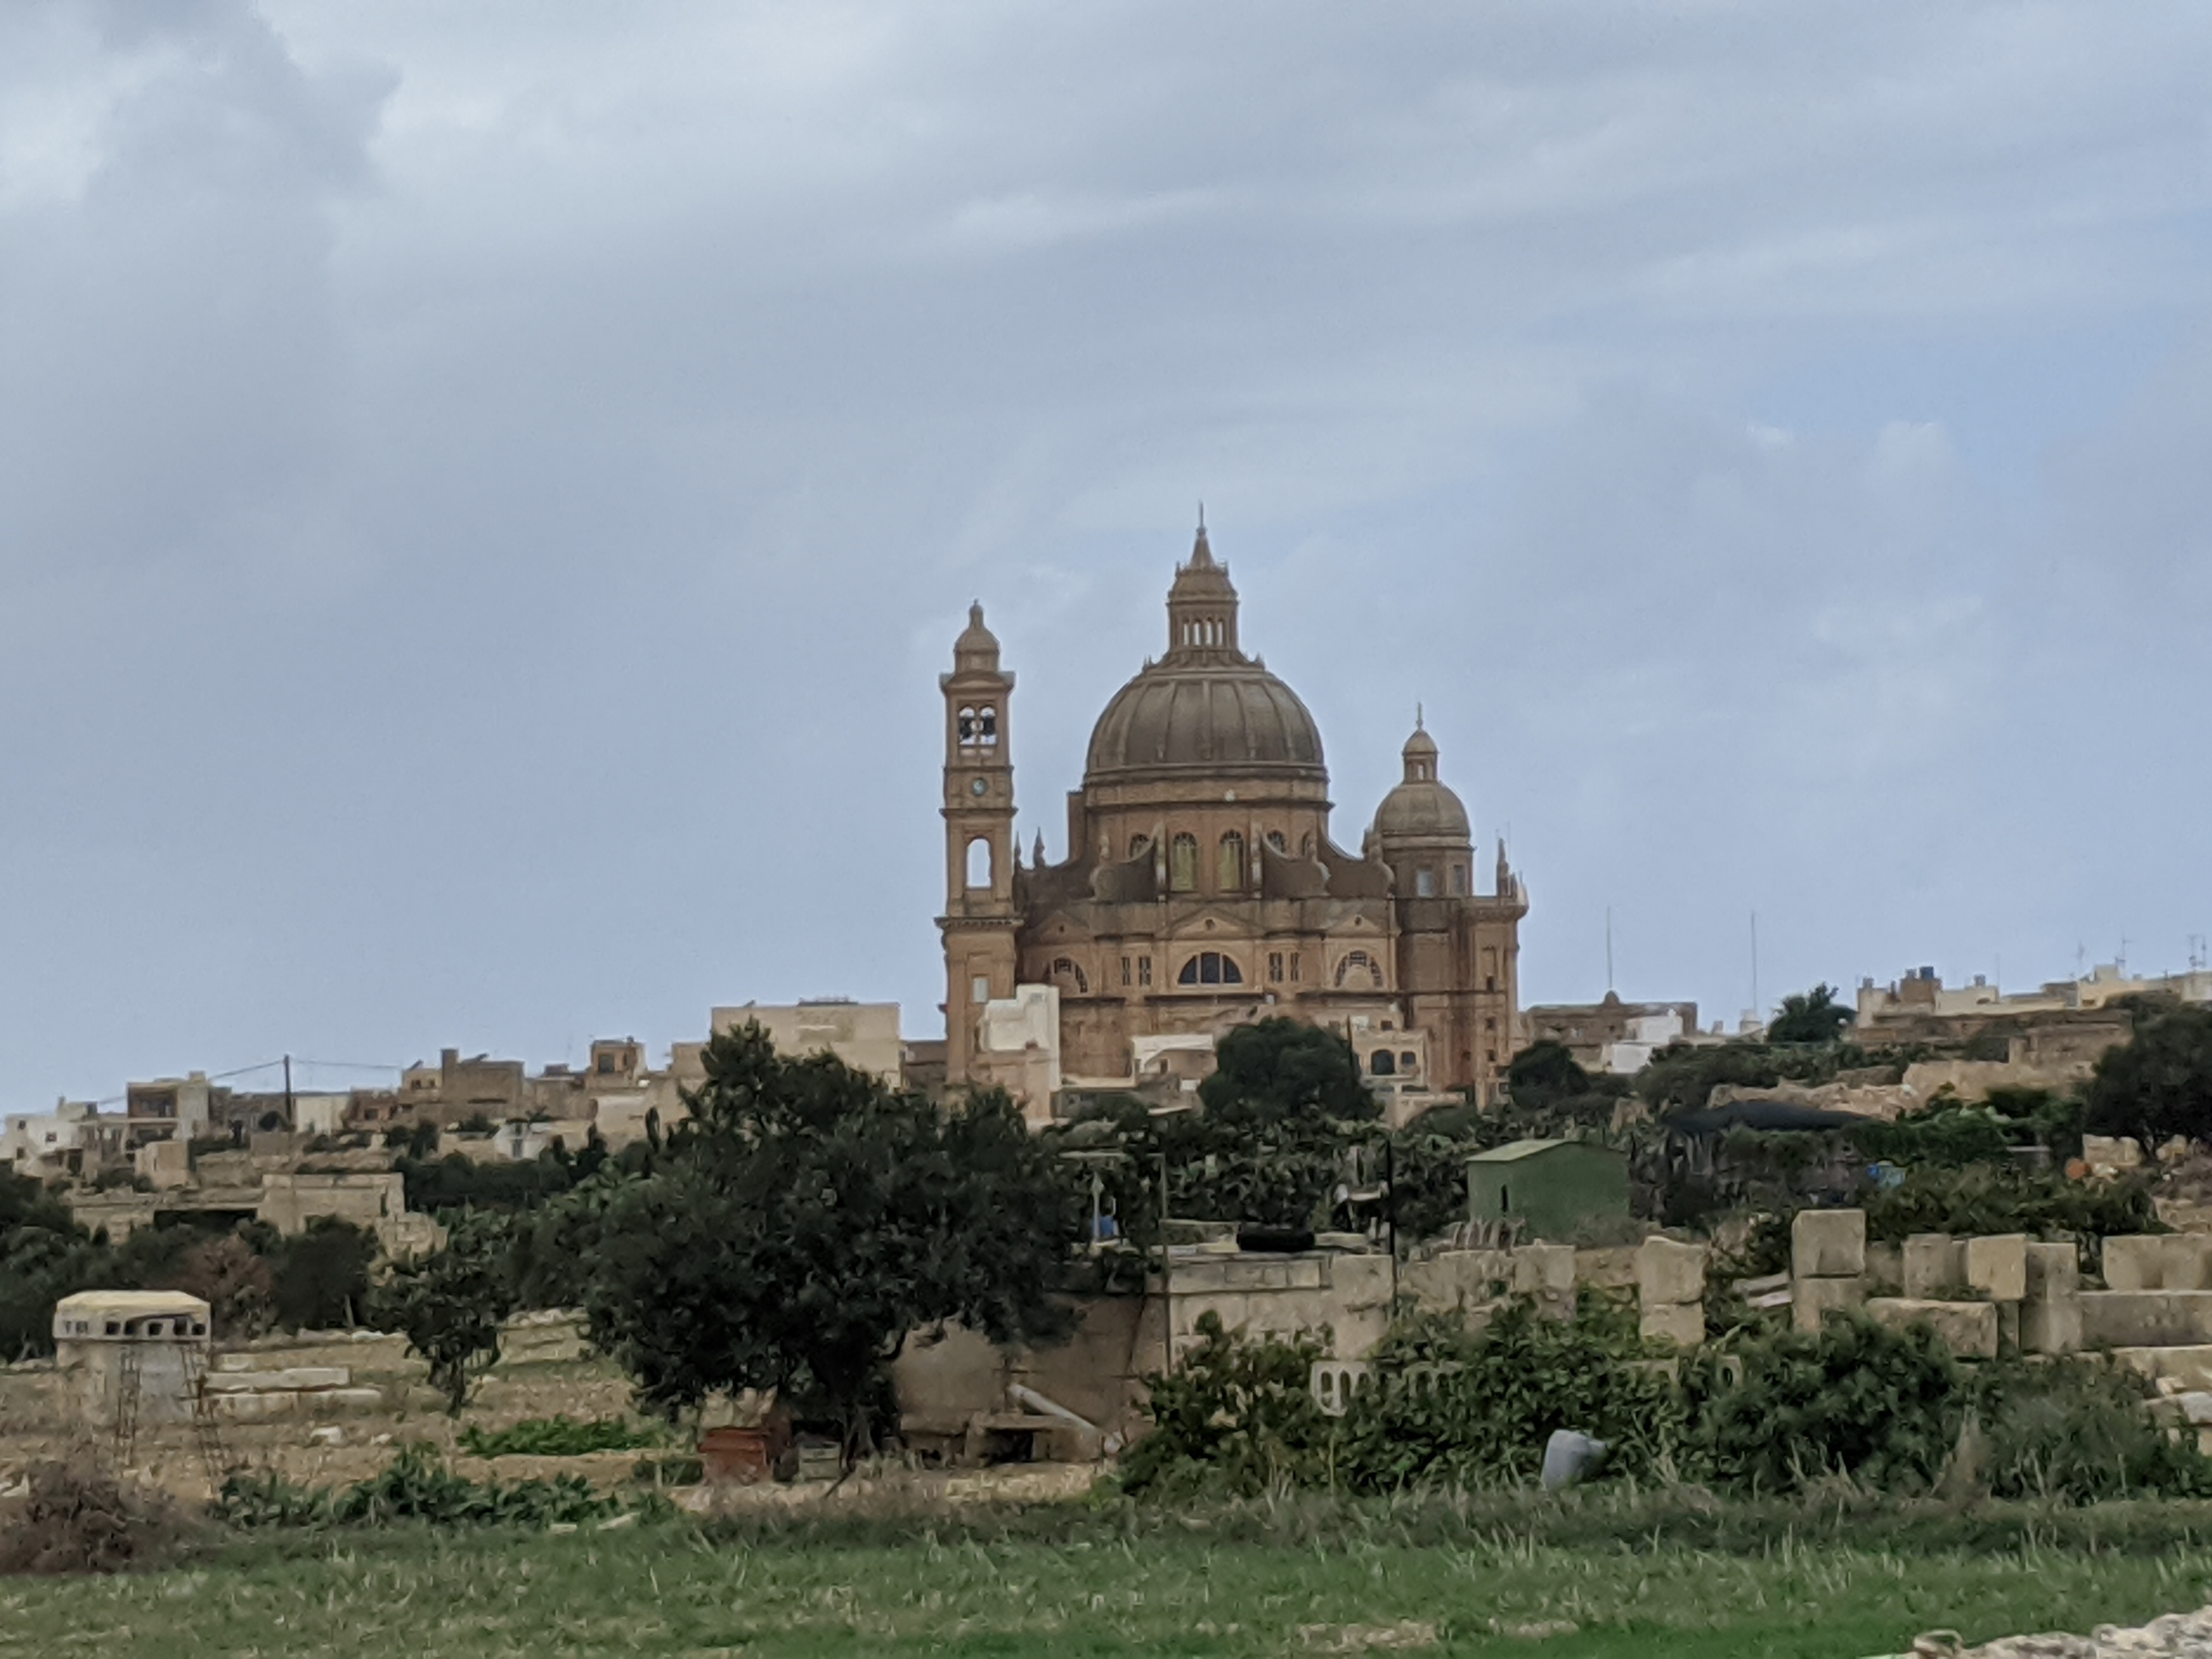 3 Days in Malta Weekend Itinerary - -view of the Mdina from a distance atop a hill